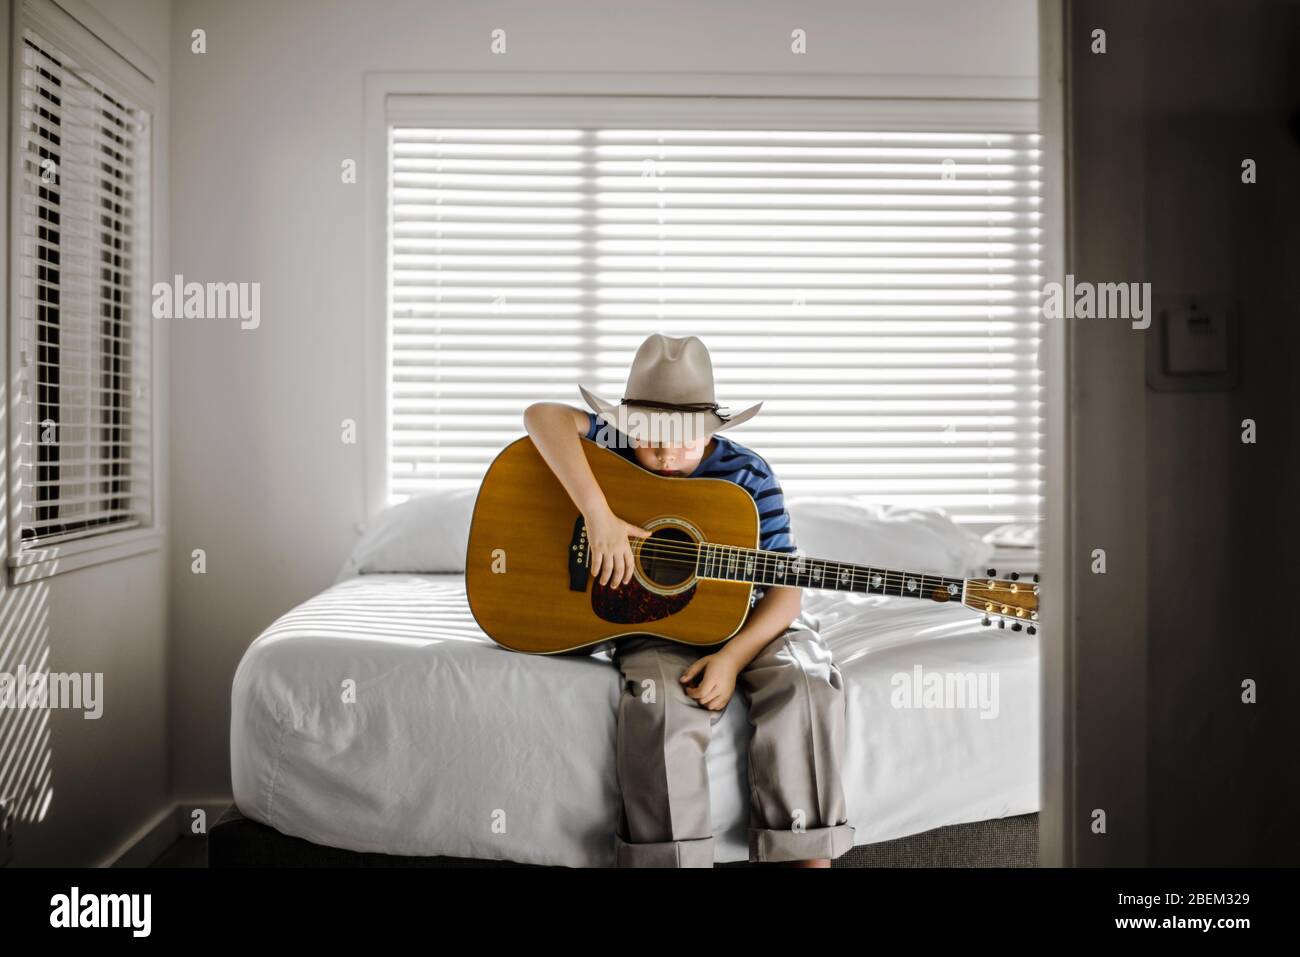 Young boy wearing a cowboy hat sitting on his bed holding an acoustic guitar Stock Photo